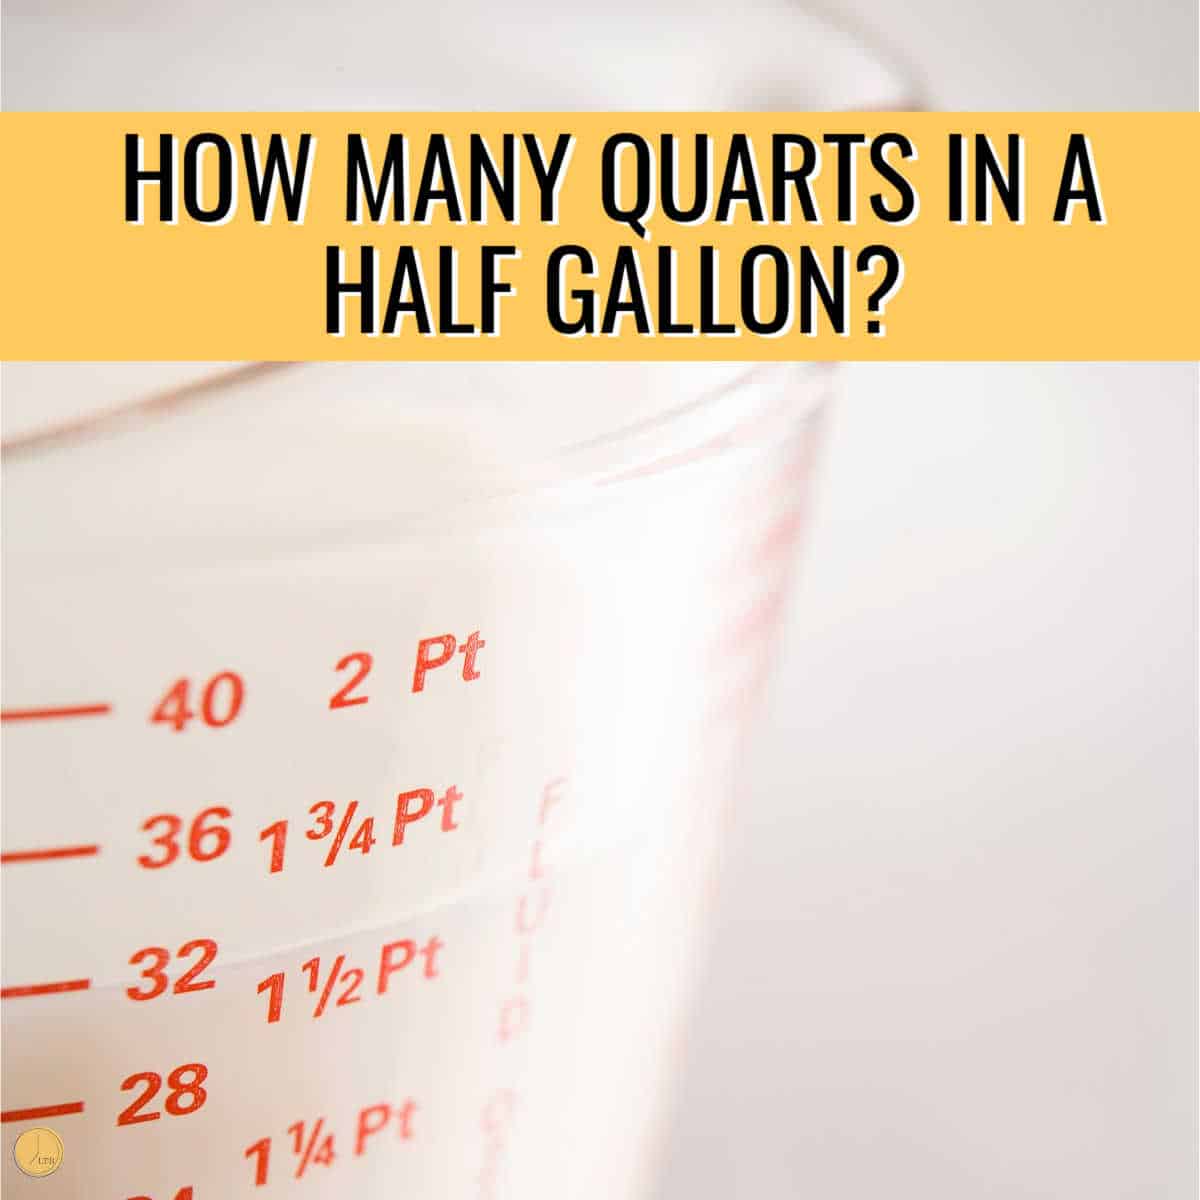 pints on measuring cups with yellow banner and black text "quarts in a half gallon"